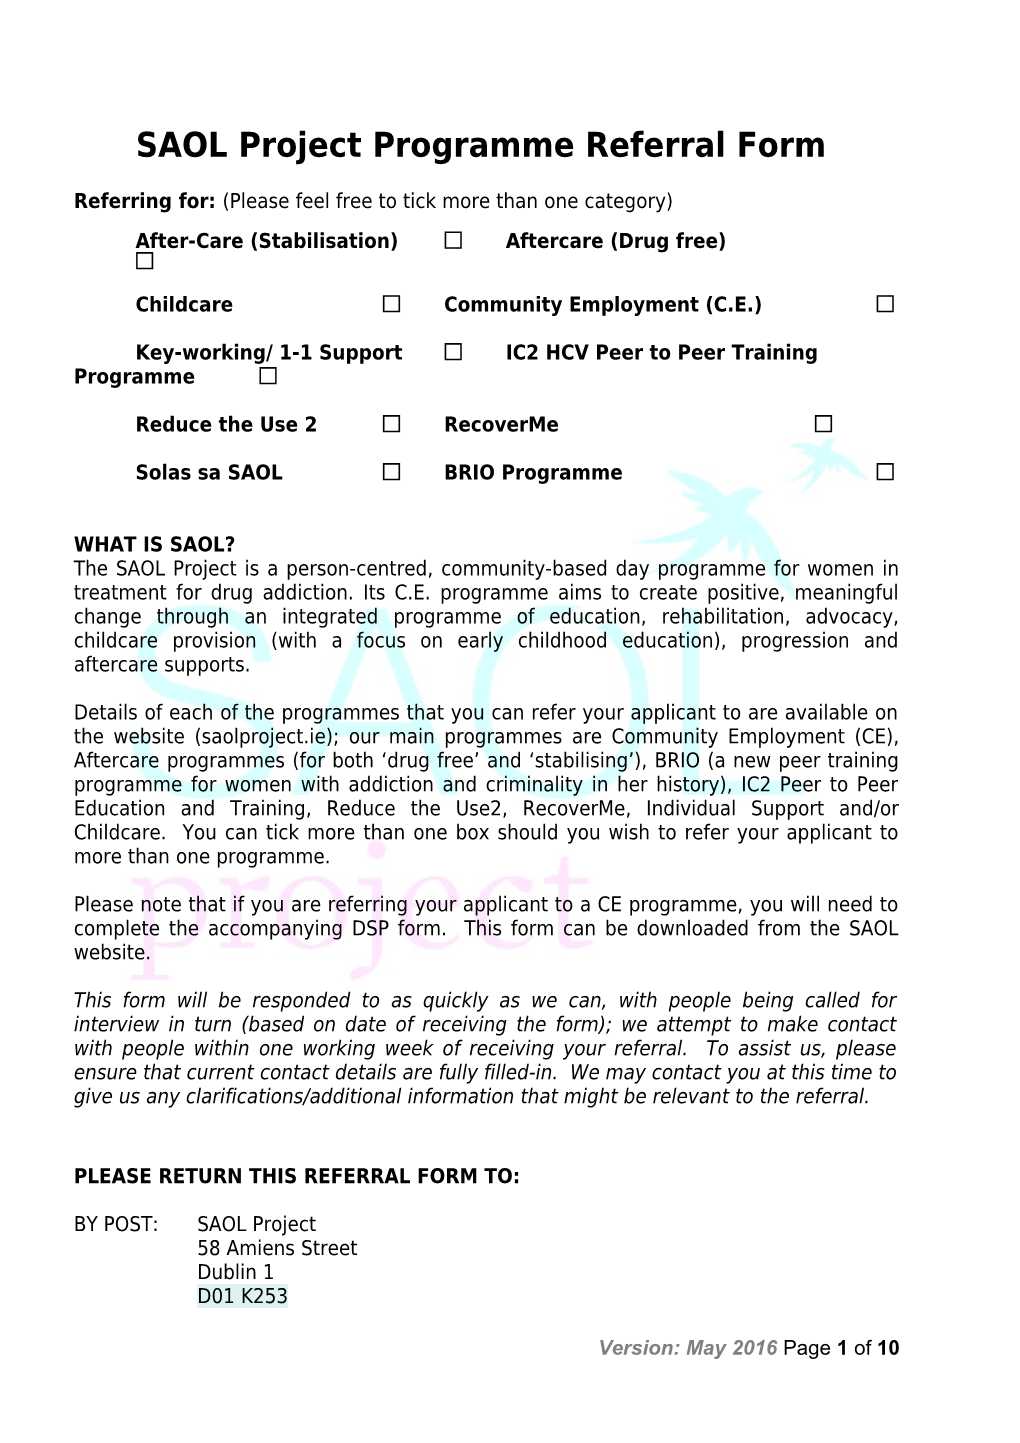 SAOL Project Programme Referral Form